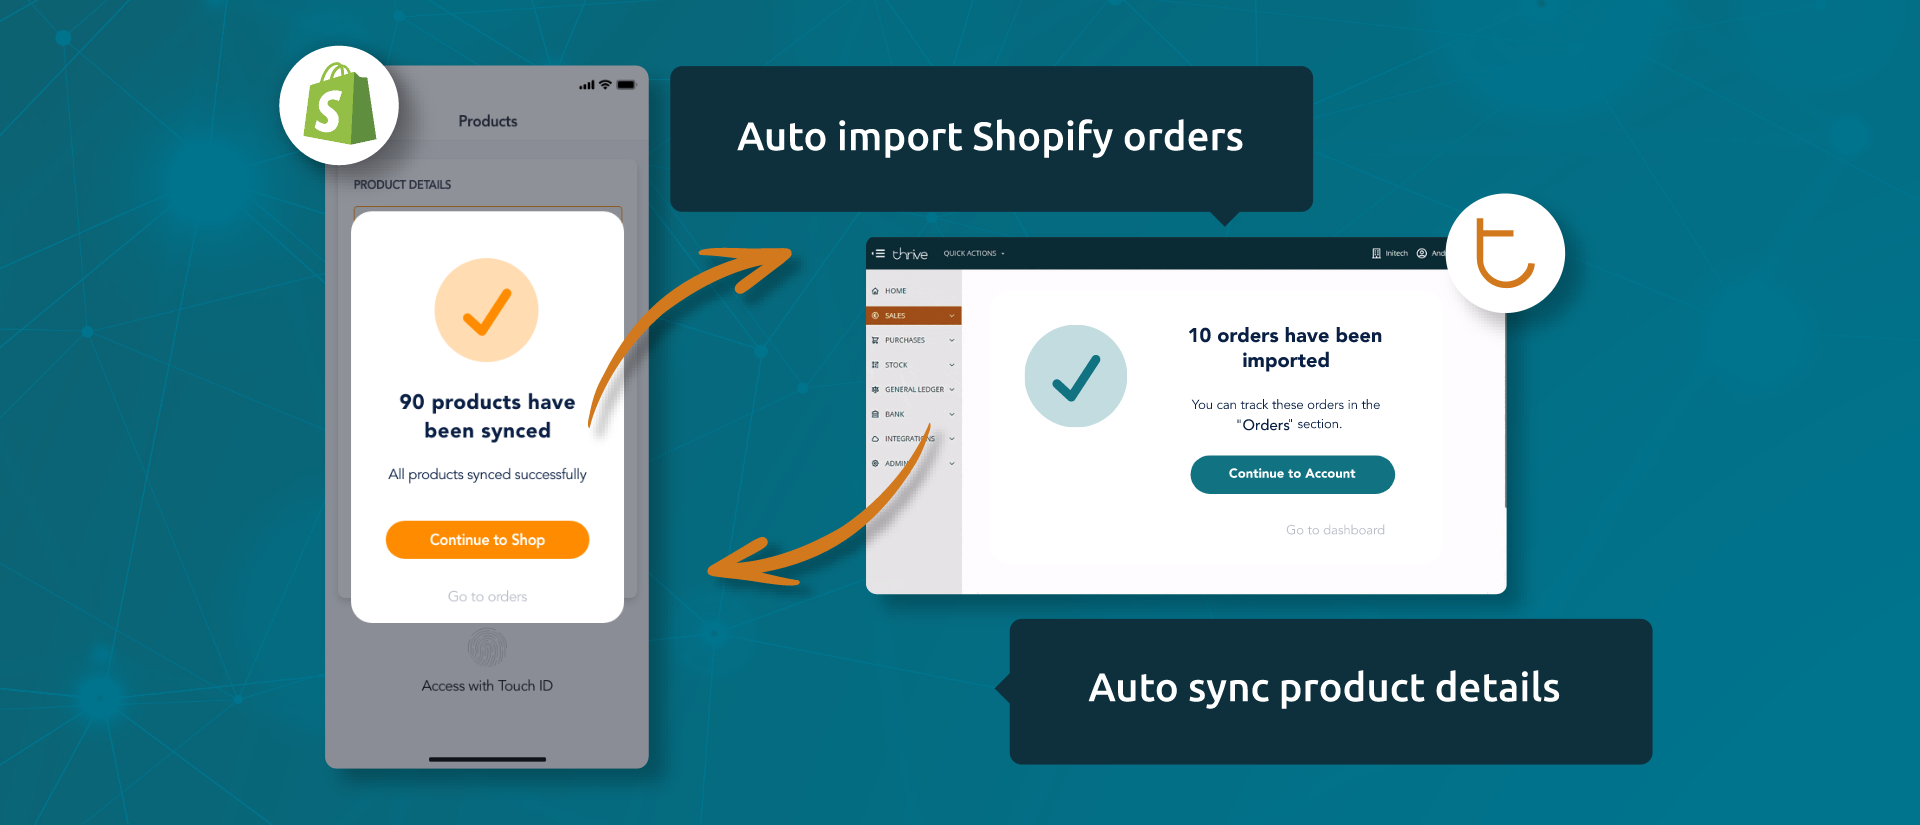 auto import shopify orders